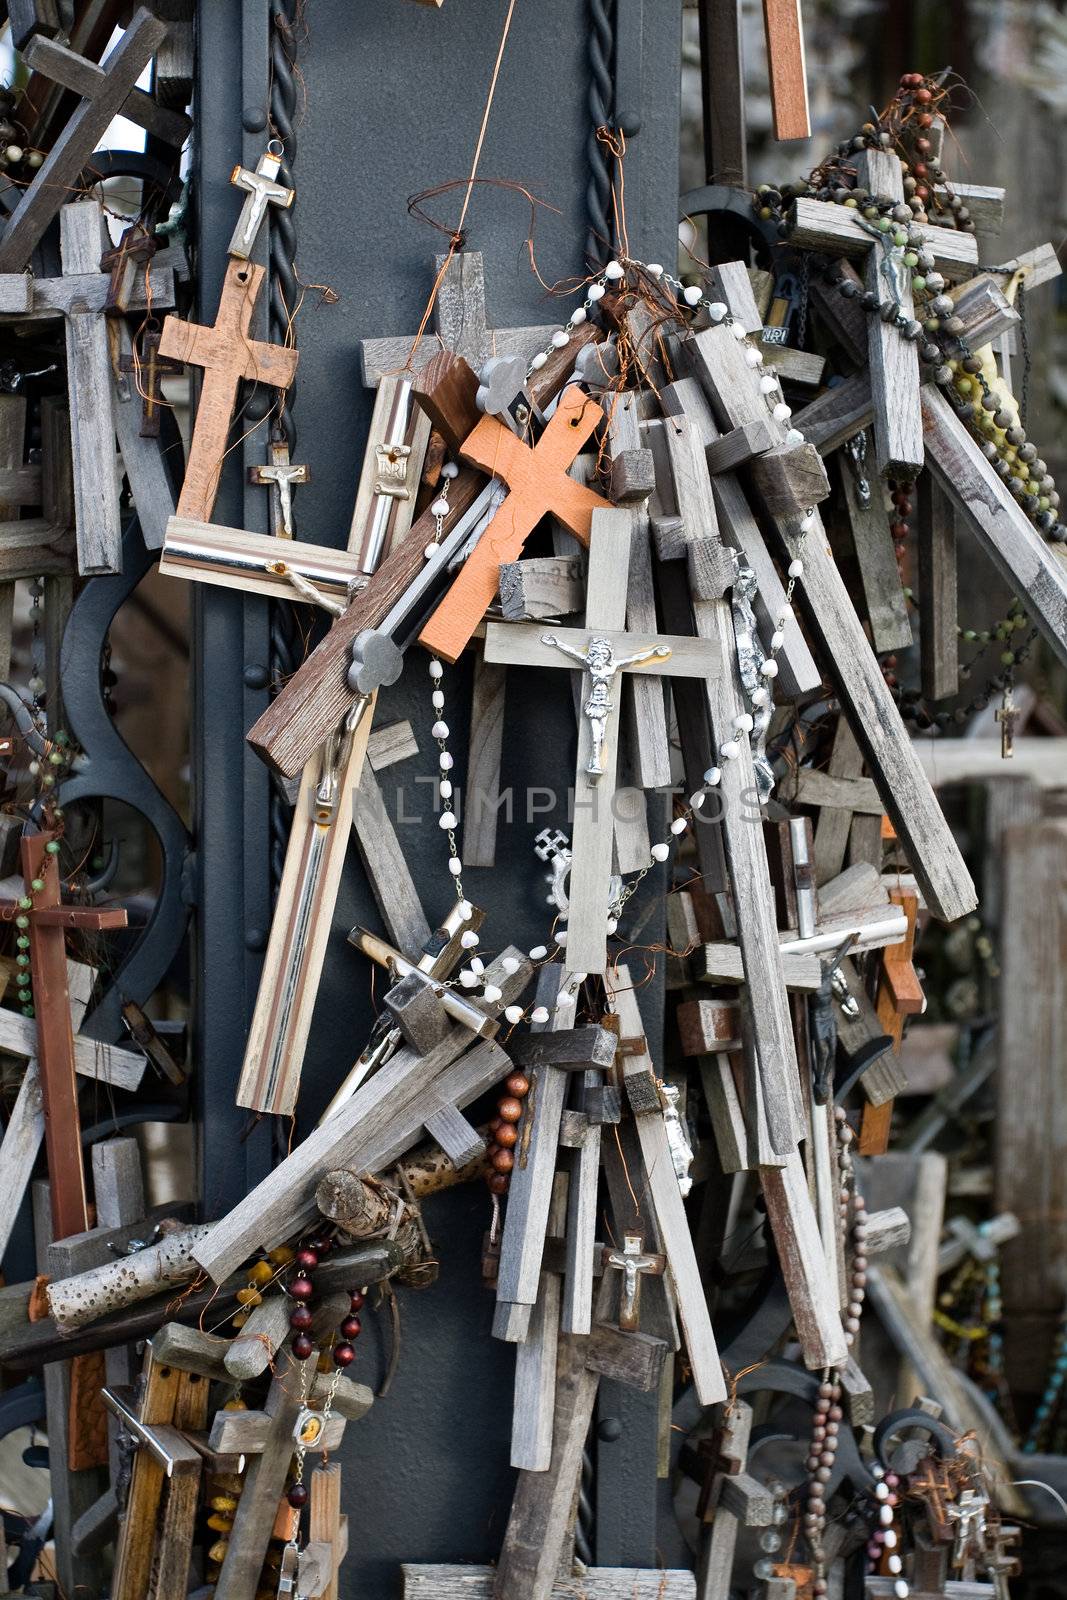 The Hill of Crosses in Lithuania by ints